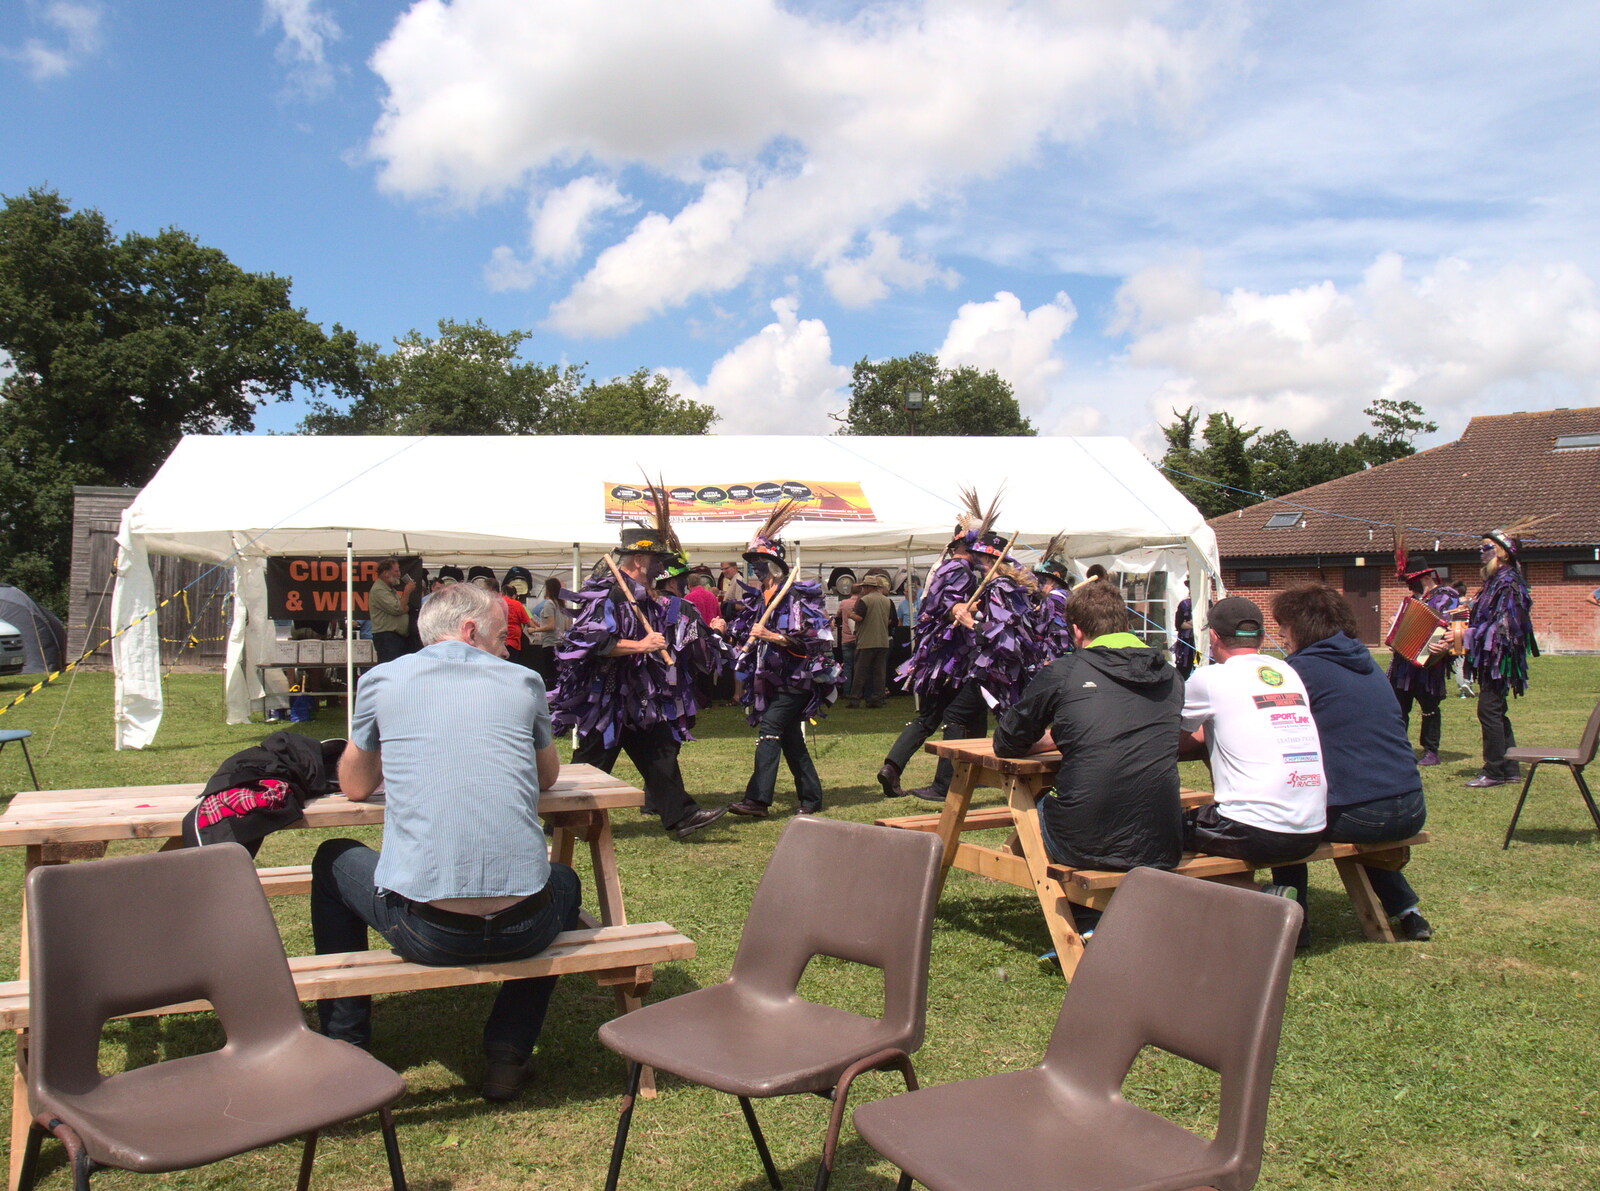 Morris dancing and marquees from The Humpty Dumpty Beer Festival, Reedham, Norfolk - 22nd July 2017